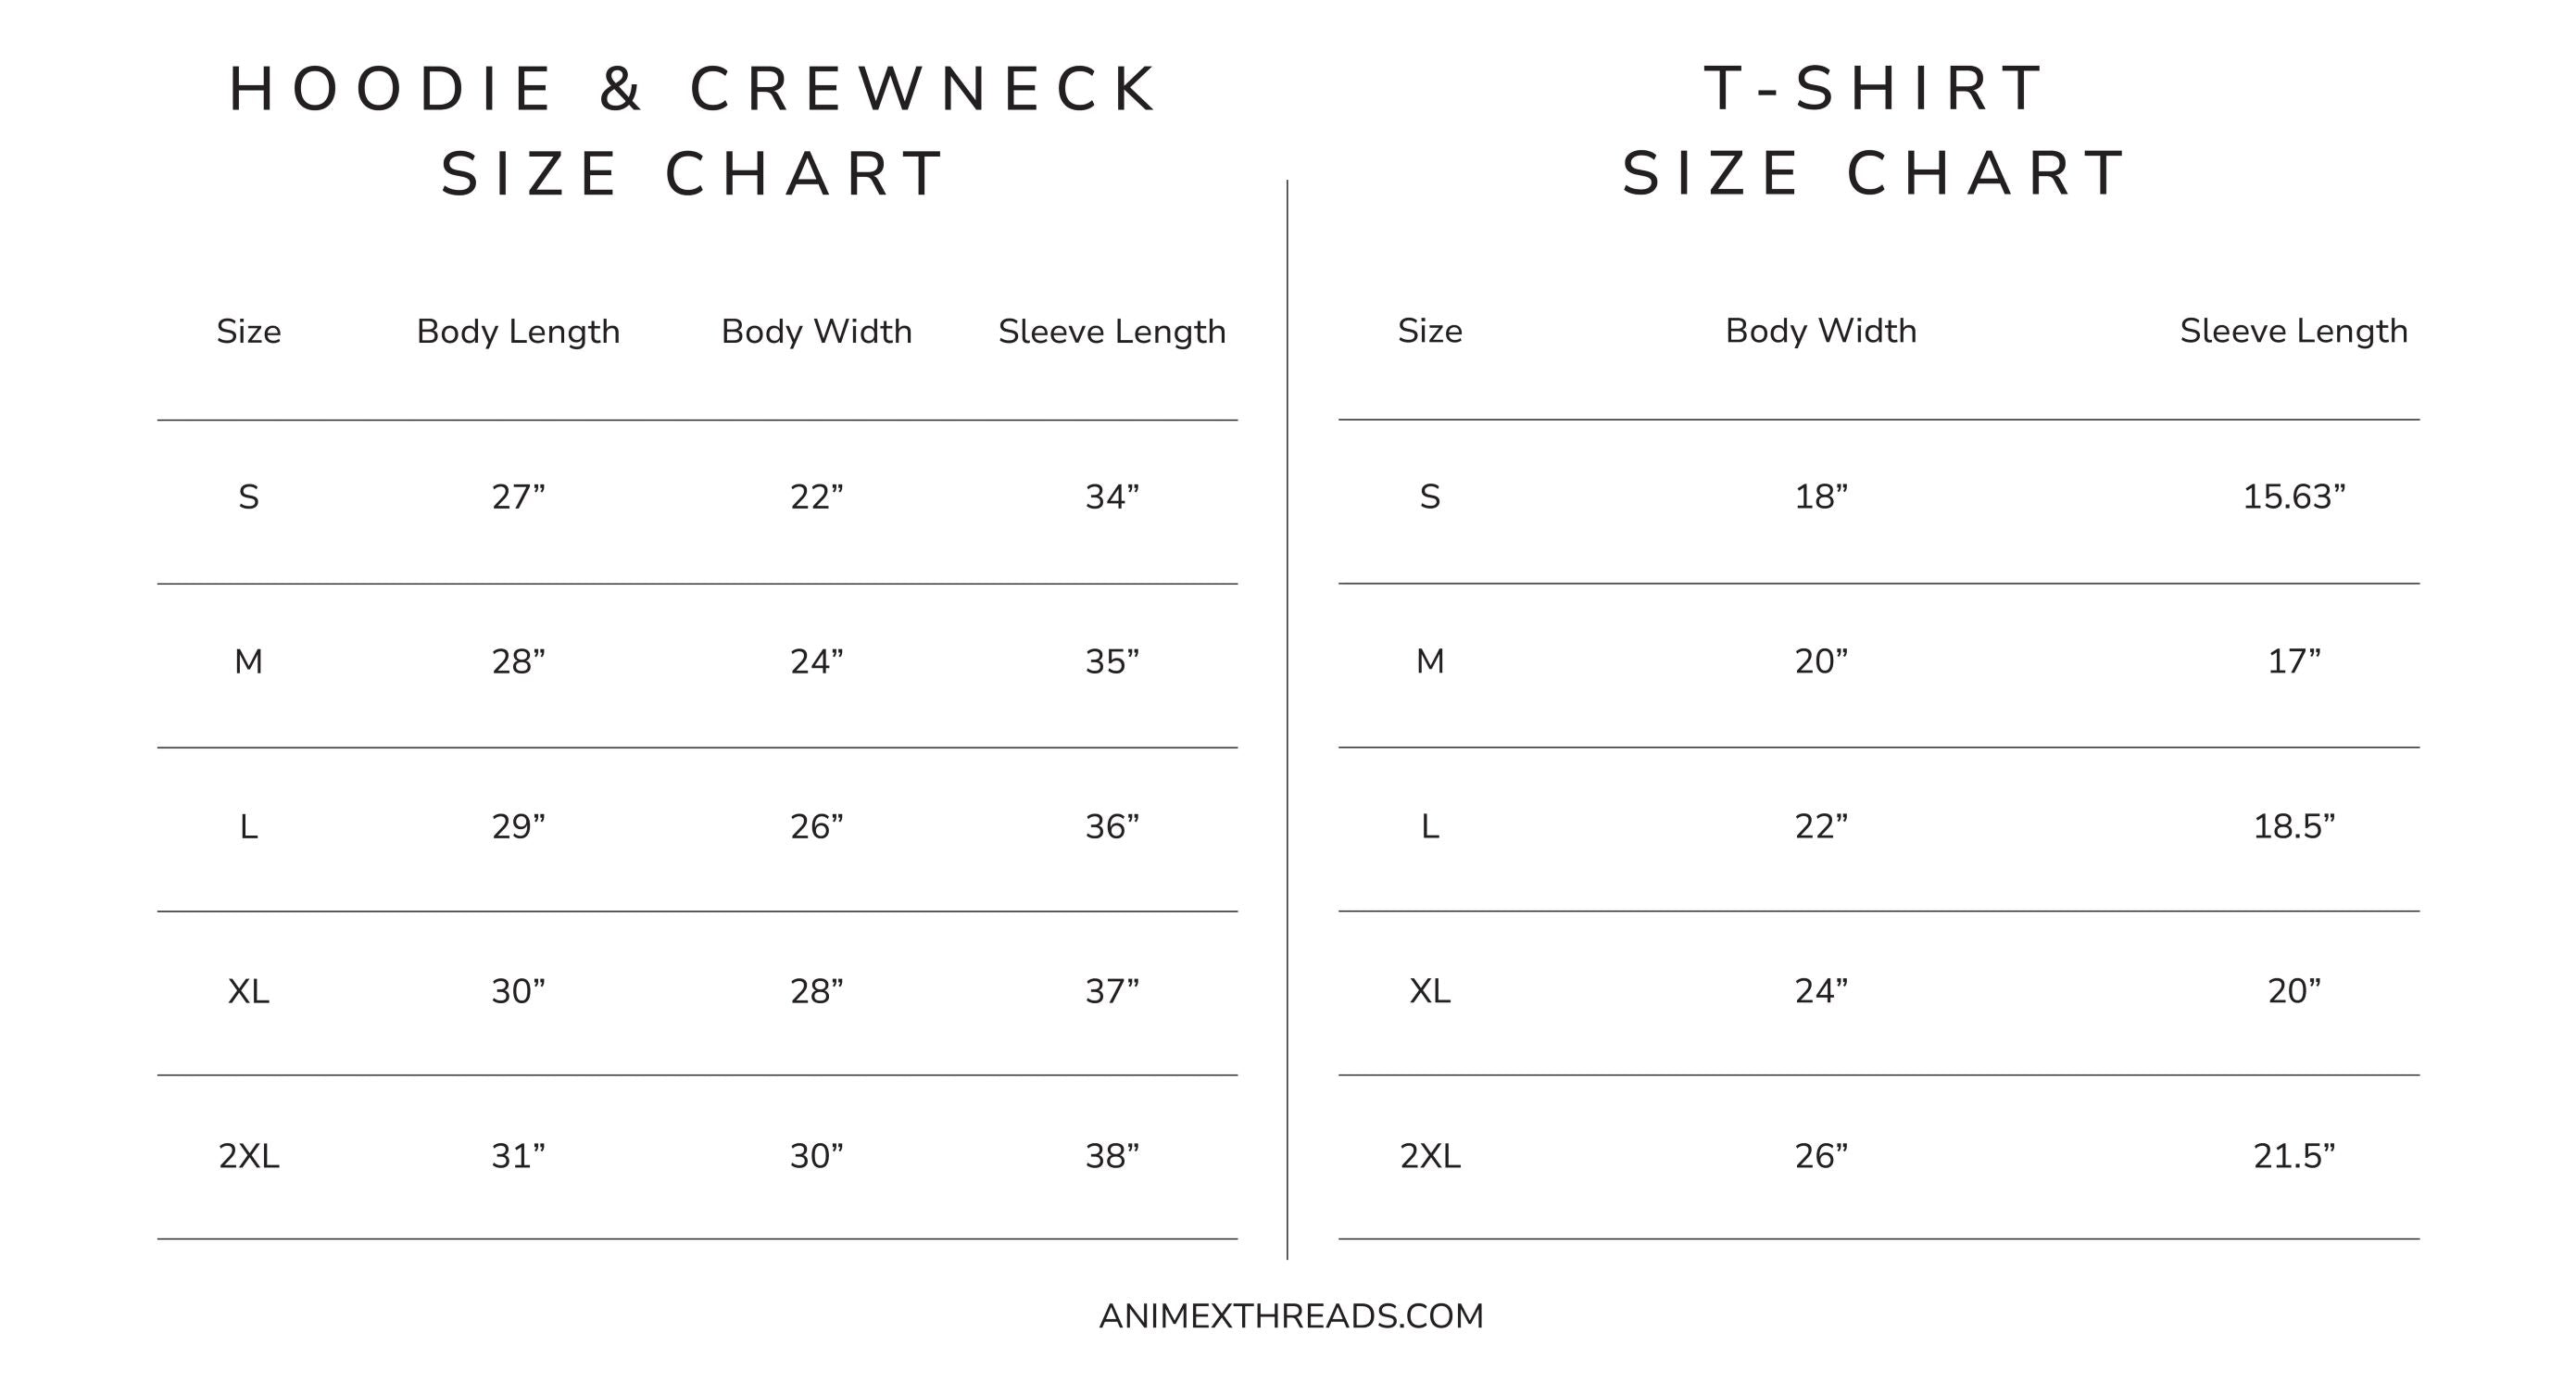 Size chart for hoodies, sweaters, and t shirts so people can order the sweater that fits them.